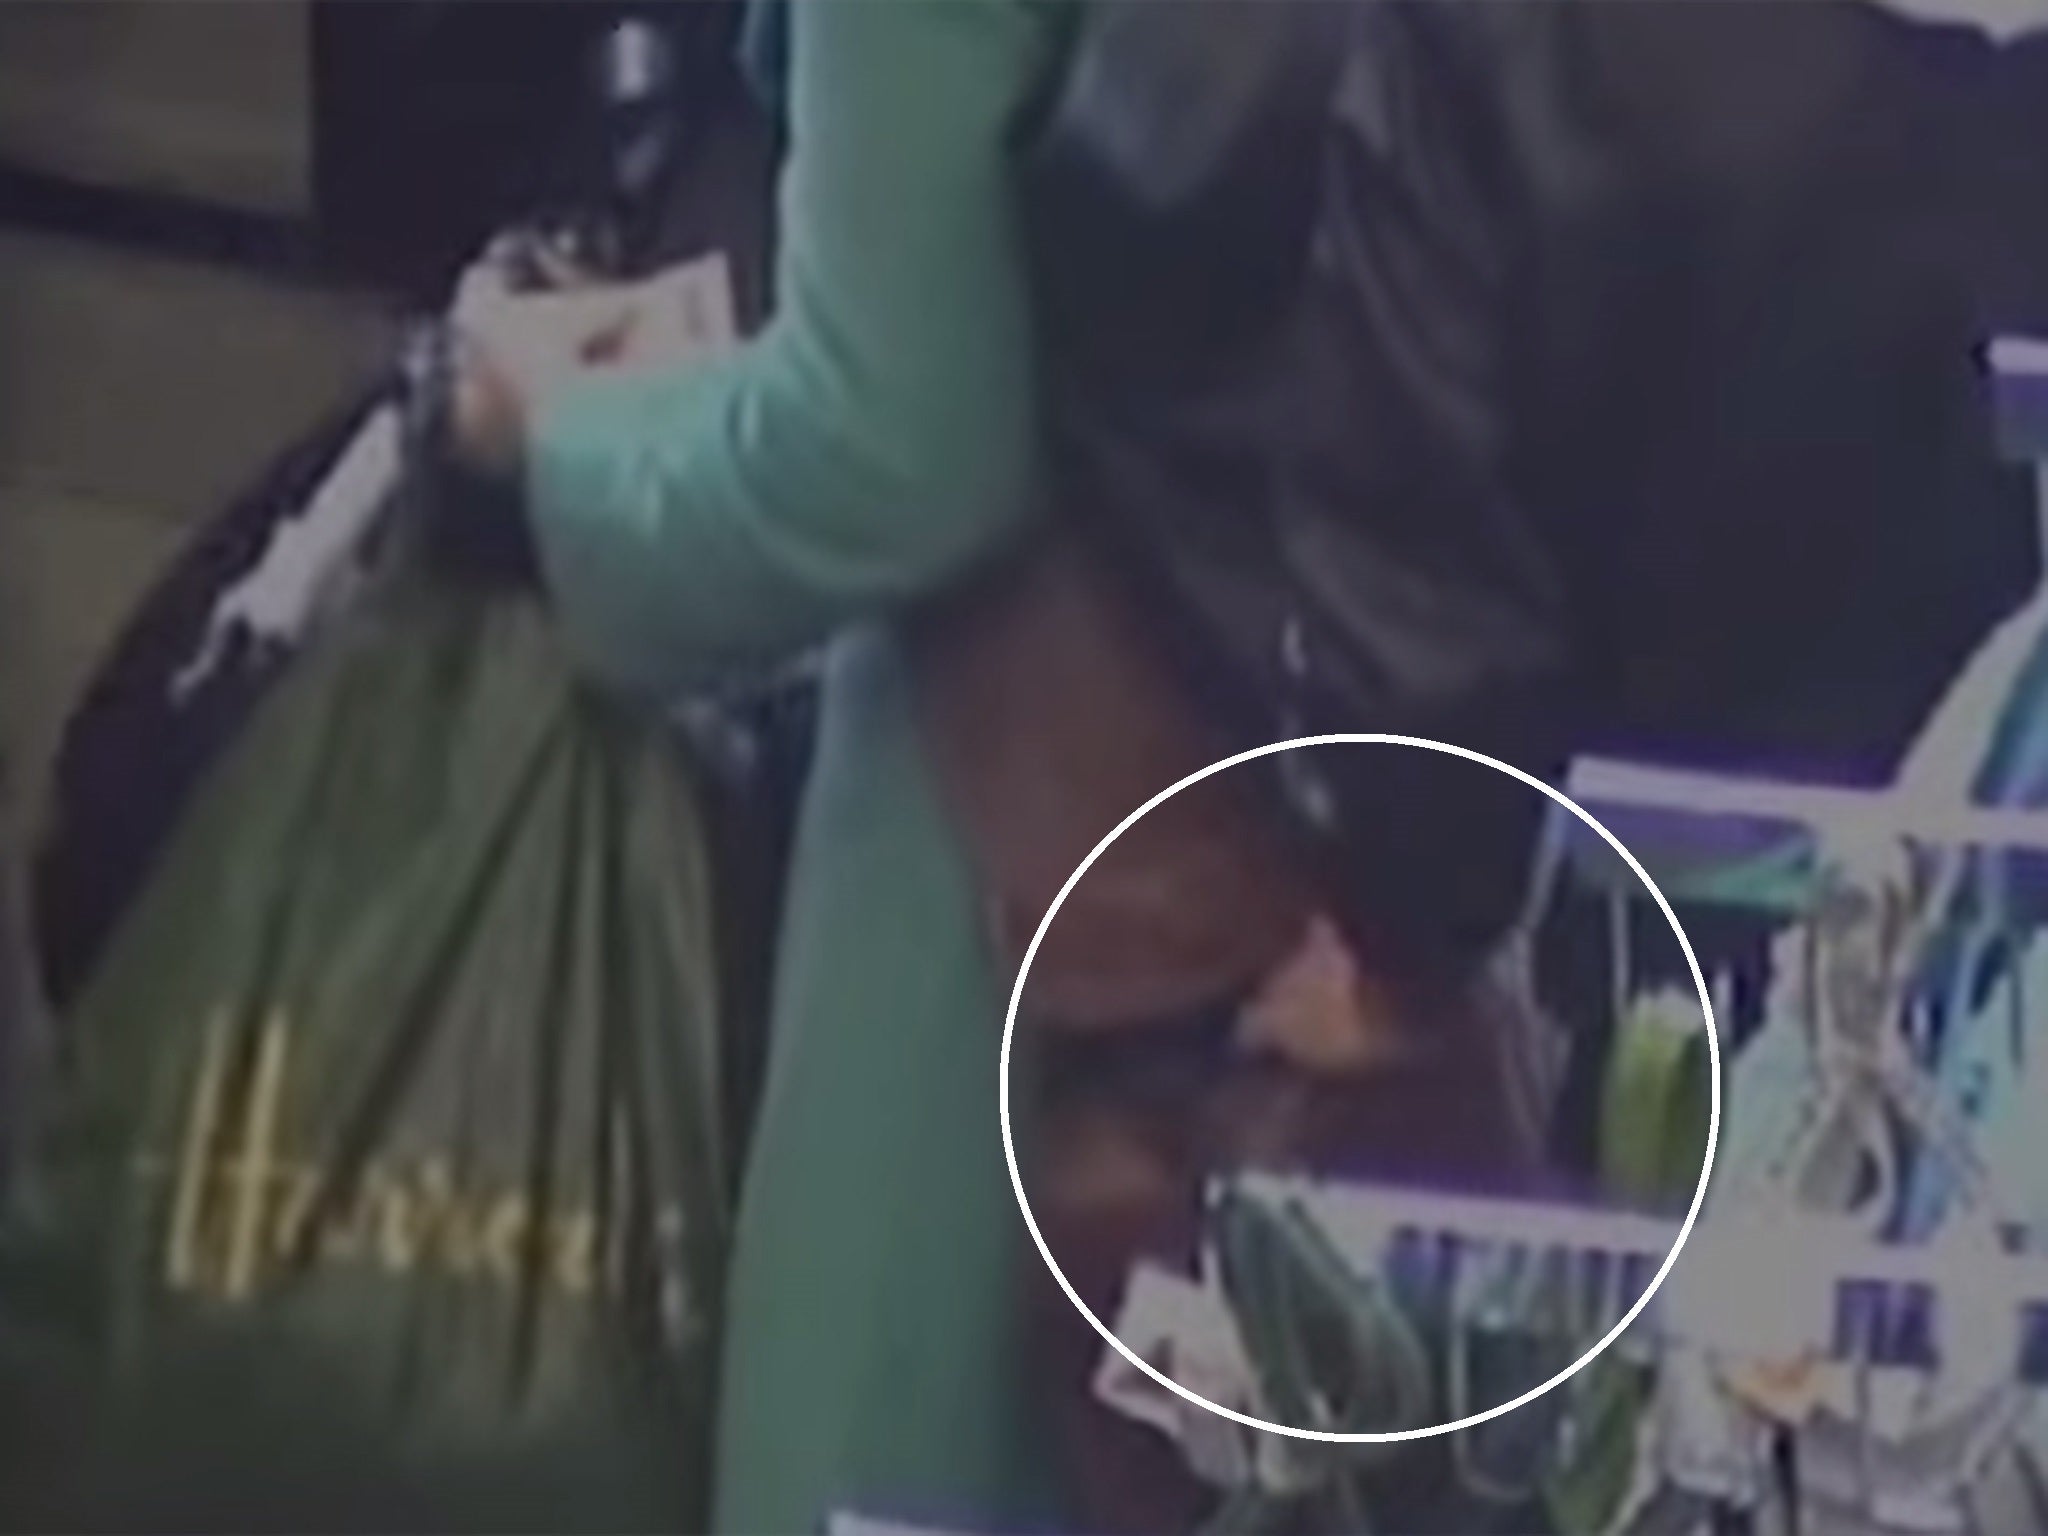 The thief steals from the woman's handbag